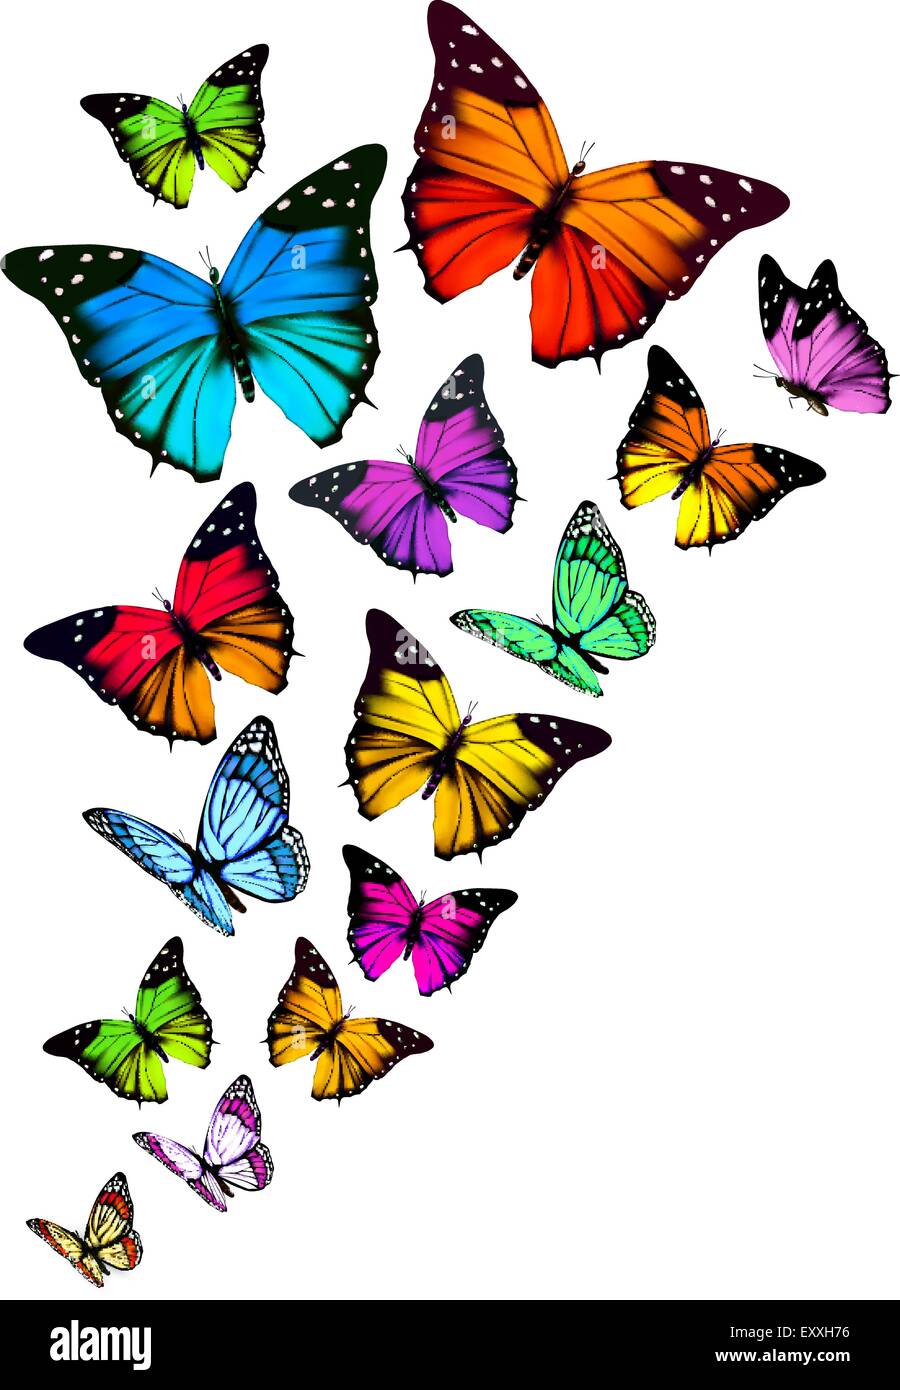 Butterflies stock photos, royalty-free images, vectors, video